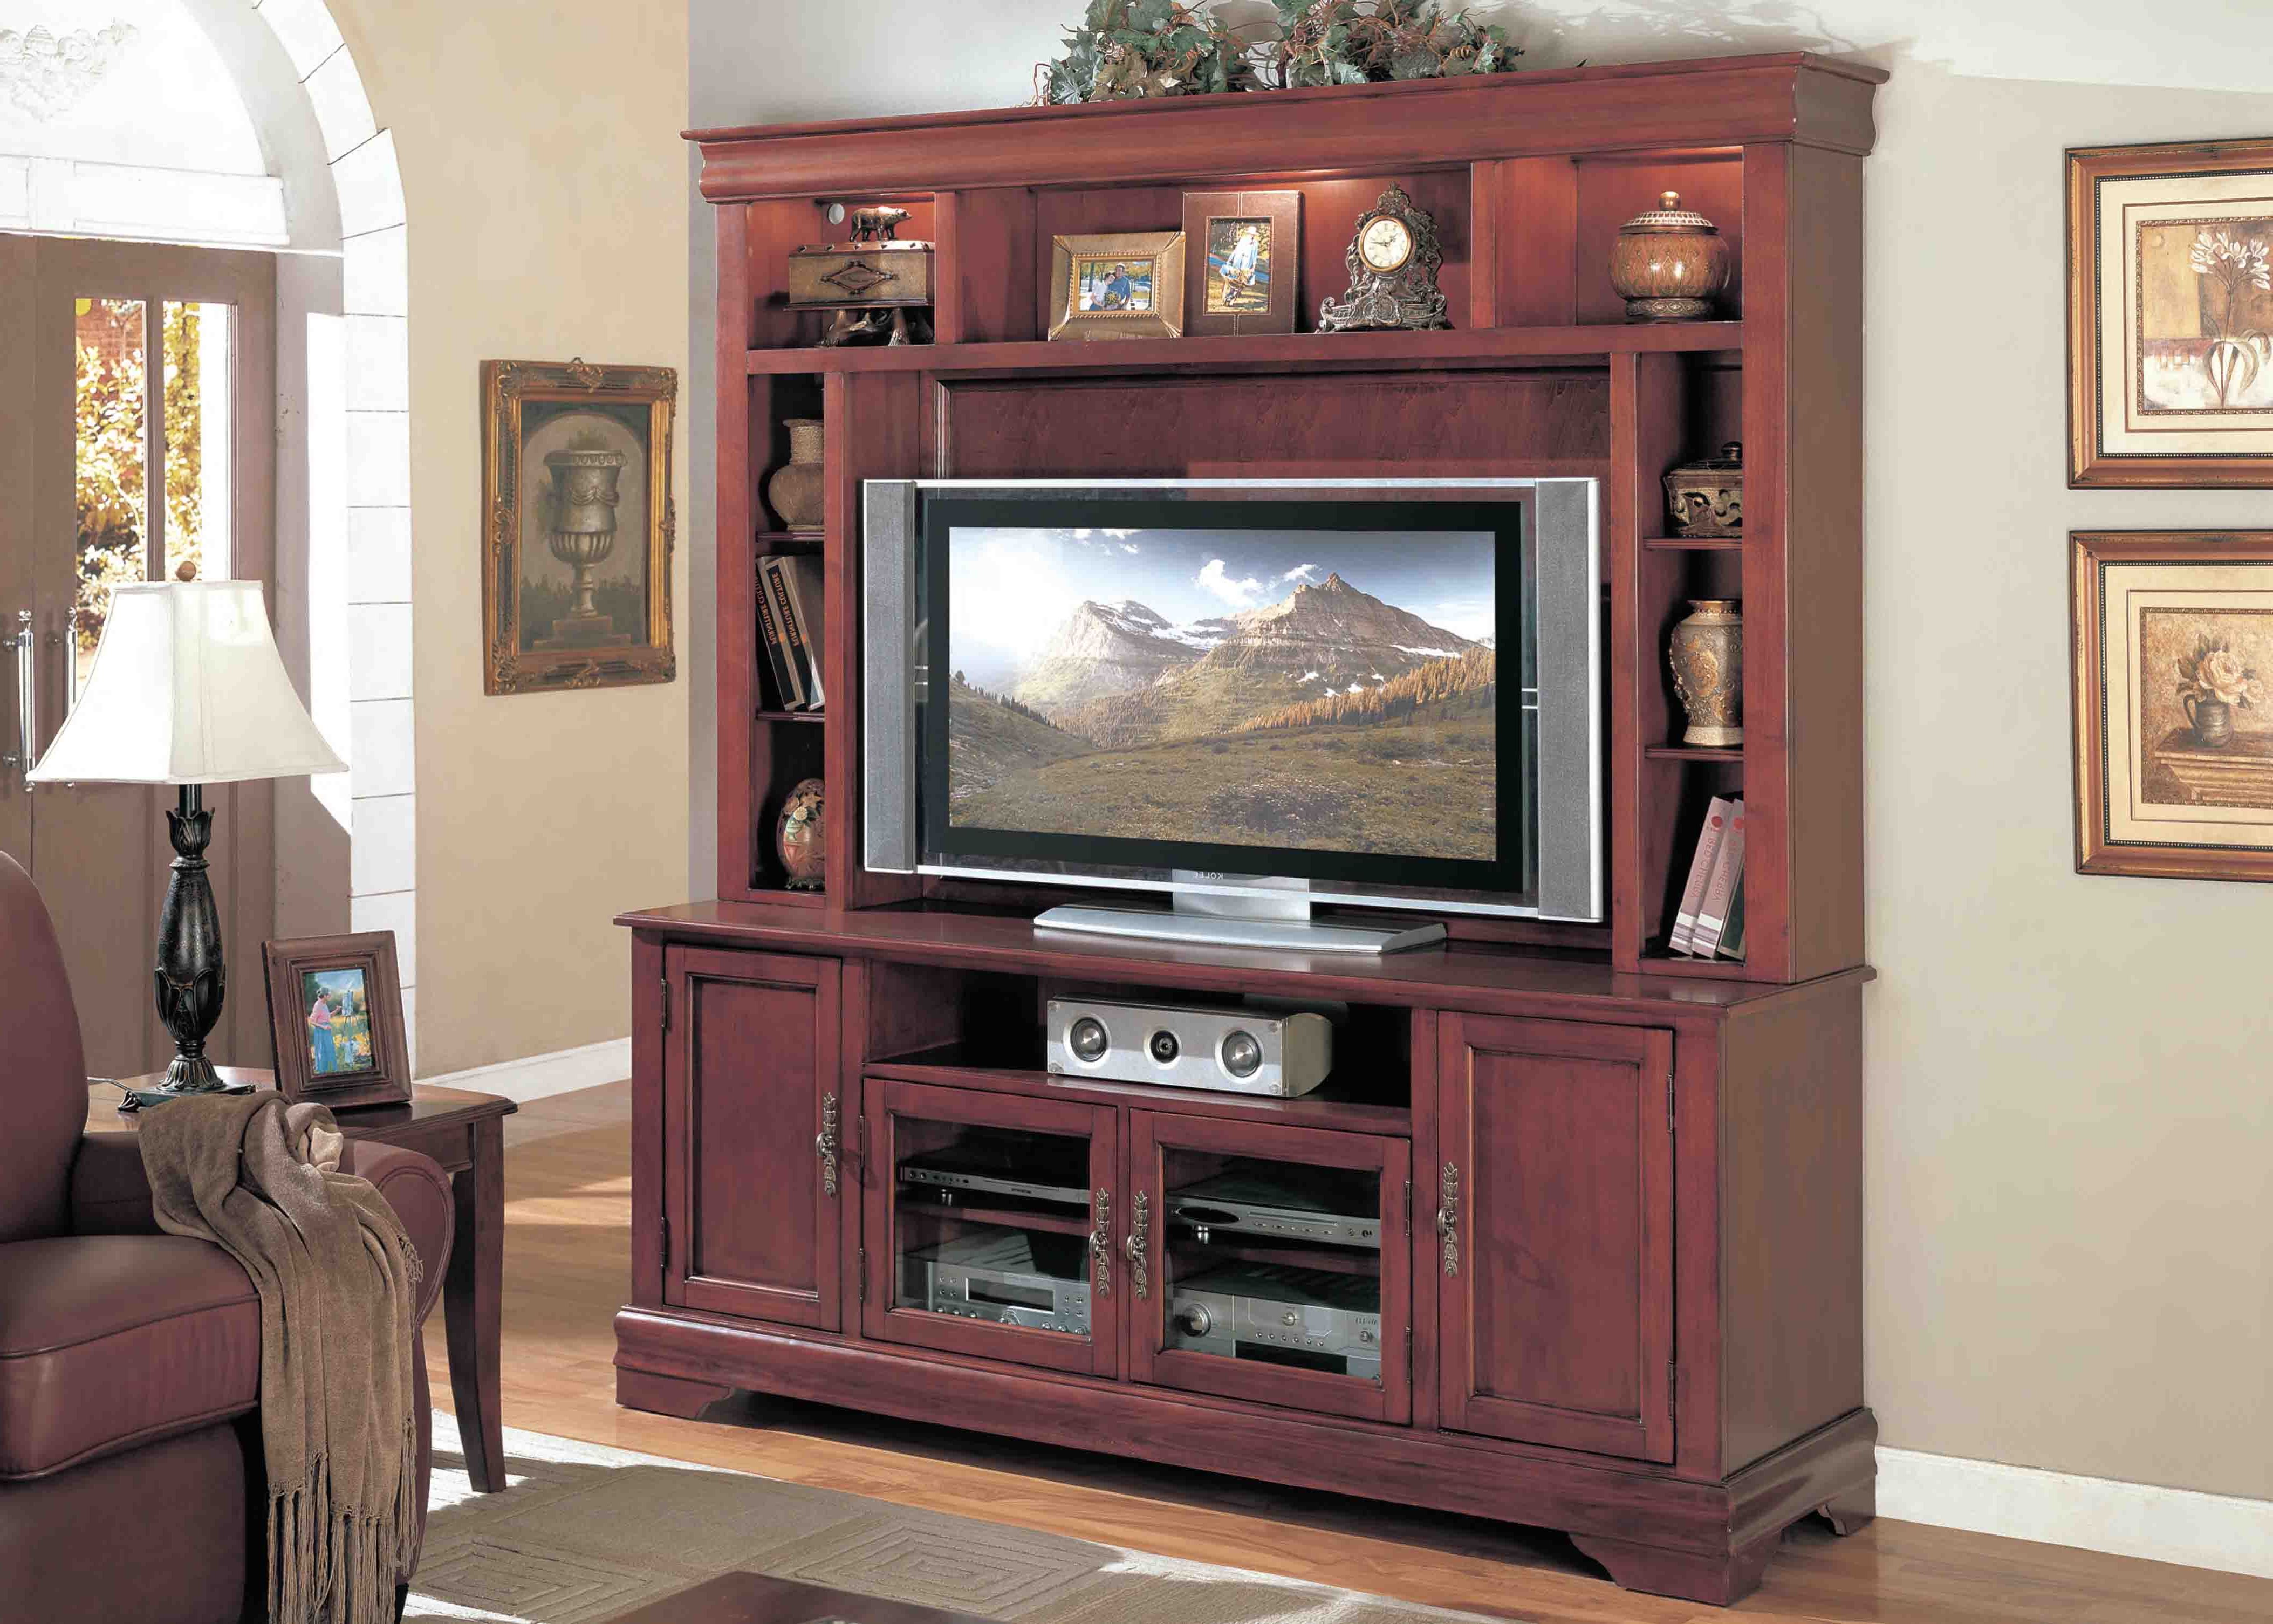 Fashionable Cherry Wood Tv Cabinets Pertaining To Wayfair Tv Stands Unfinished Media Storage Solid Wood Cabinets (View 3 of 20)